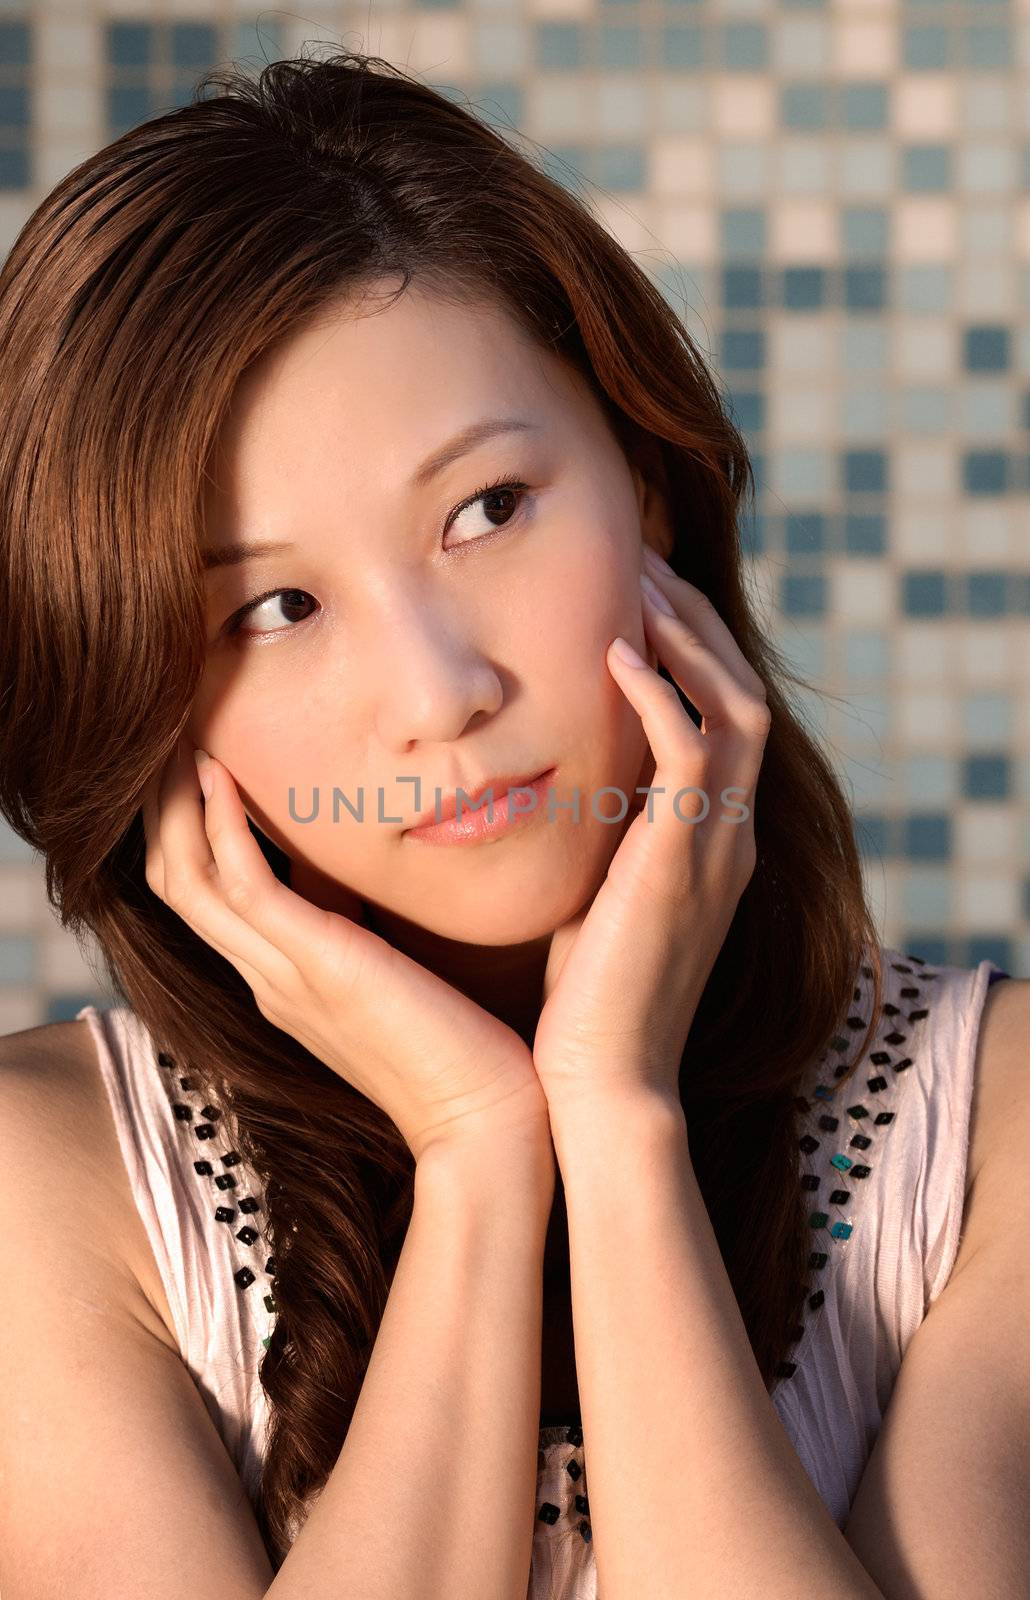 Beautiful Asian woman portrait with close-up thinking face.